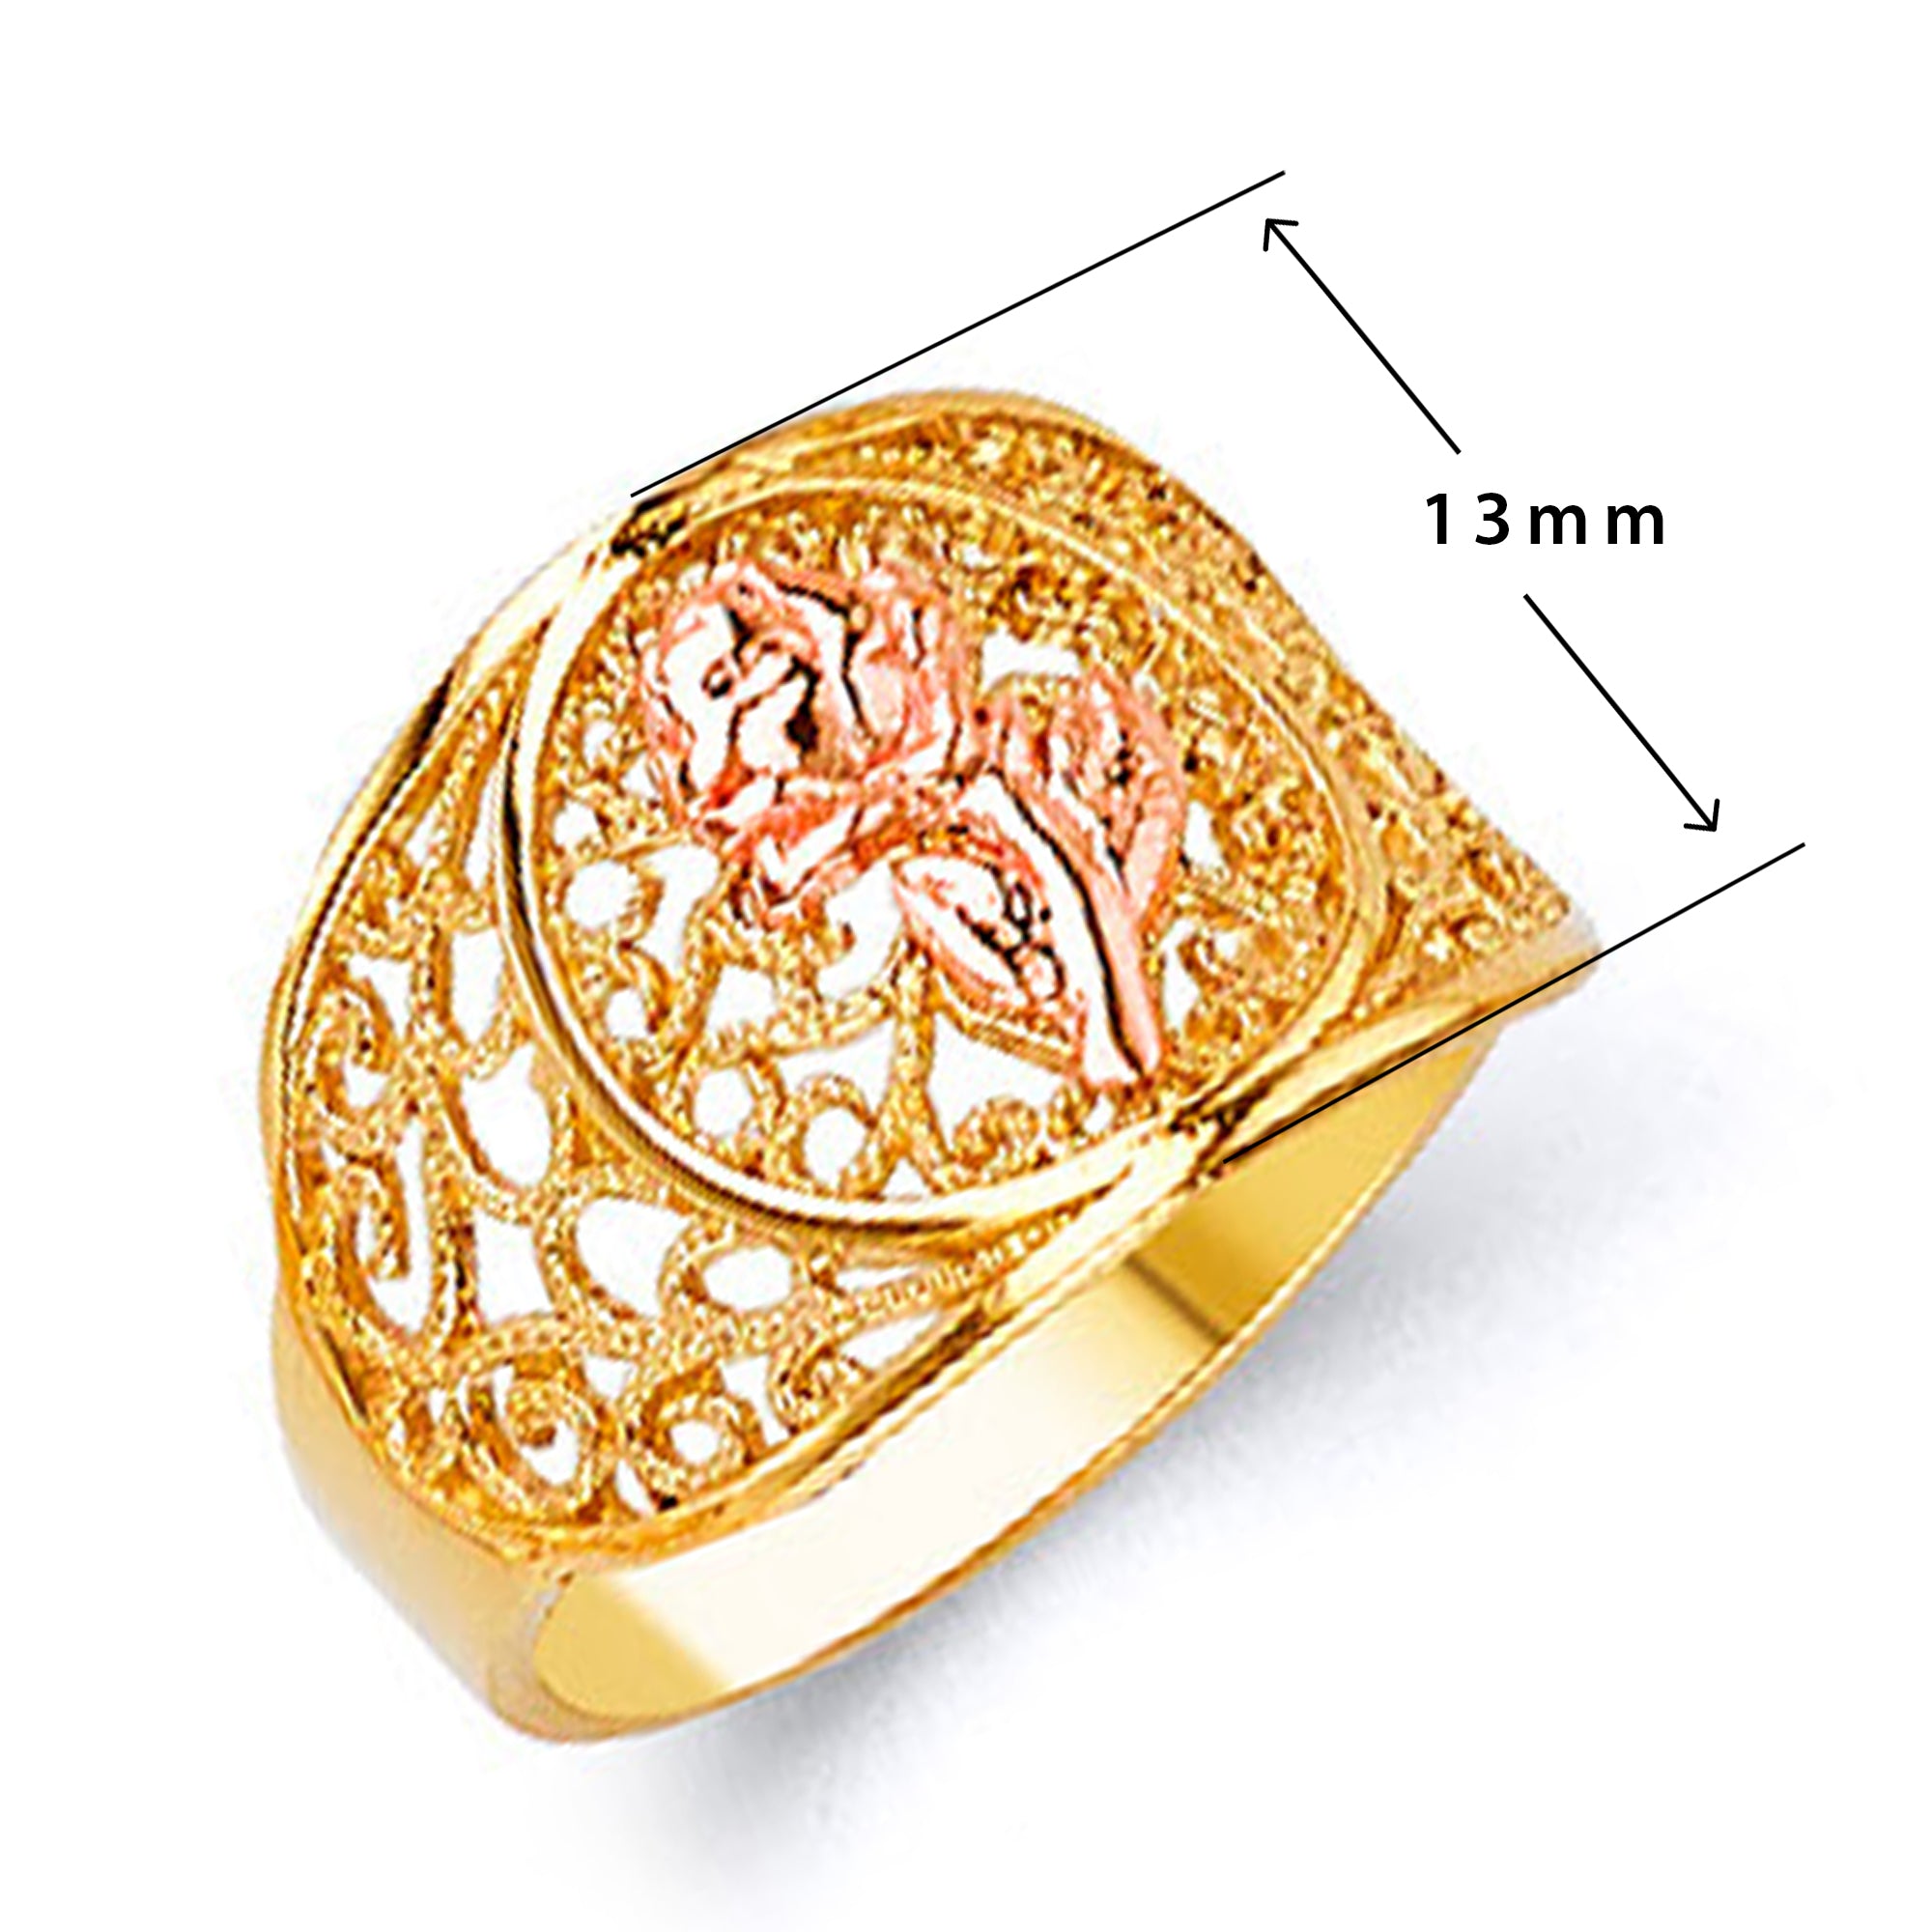 Lattice Embroidery Rose Ring in Solid Gold with Measurement